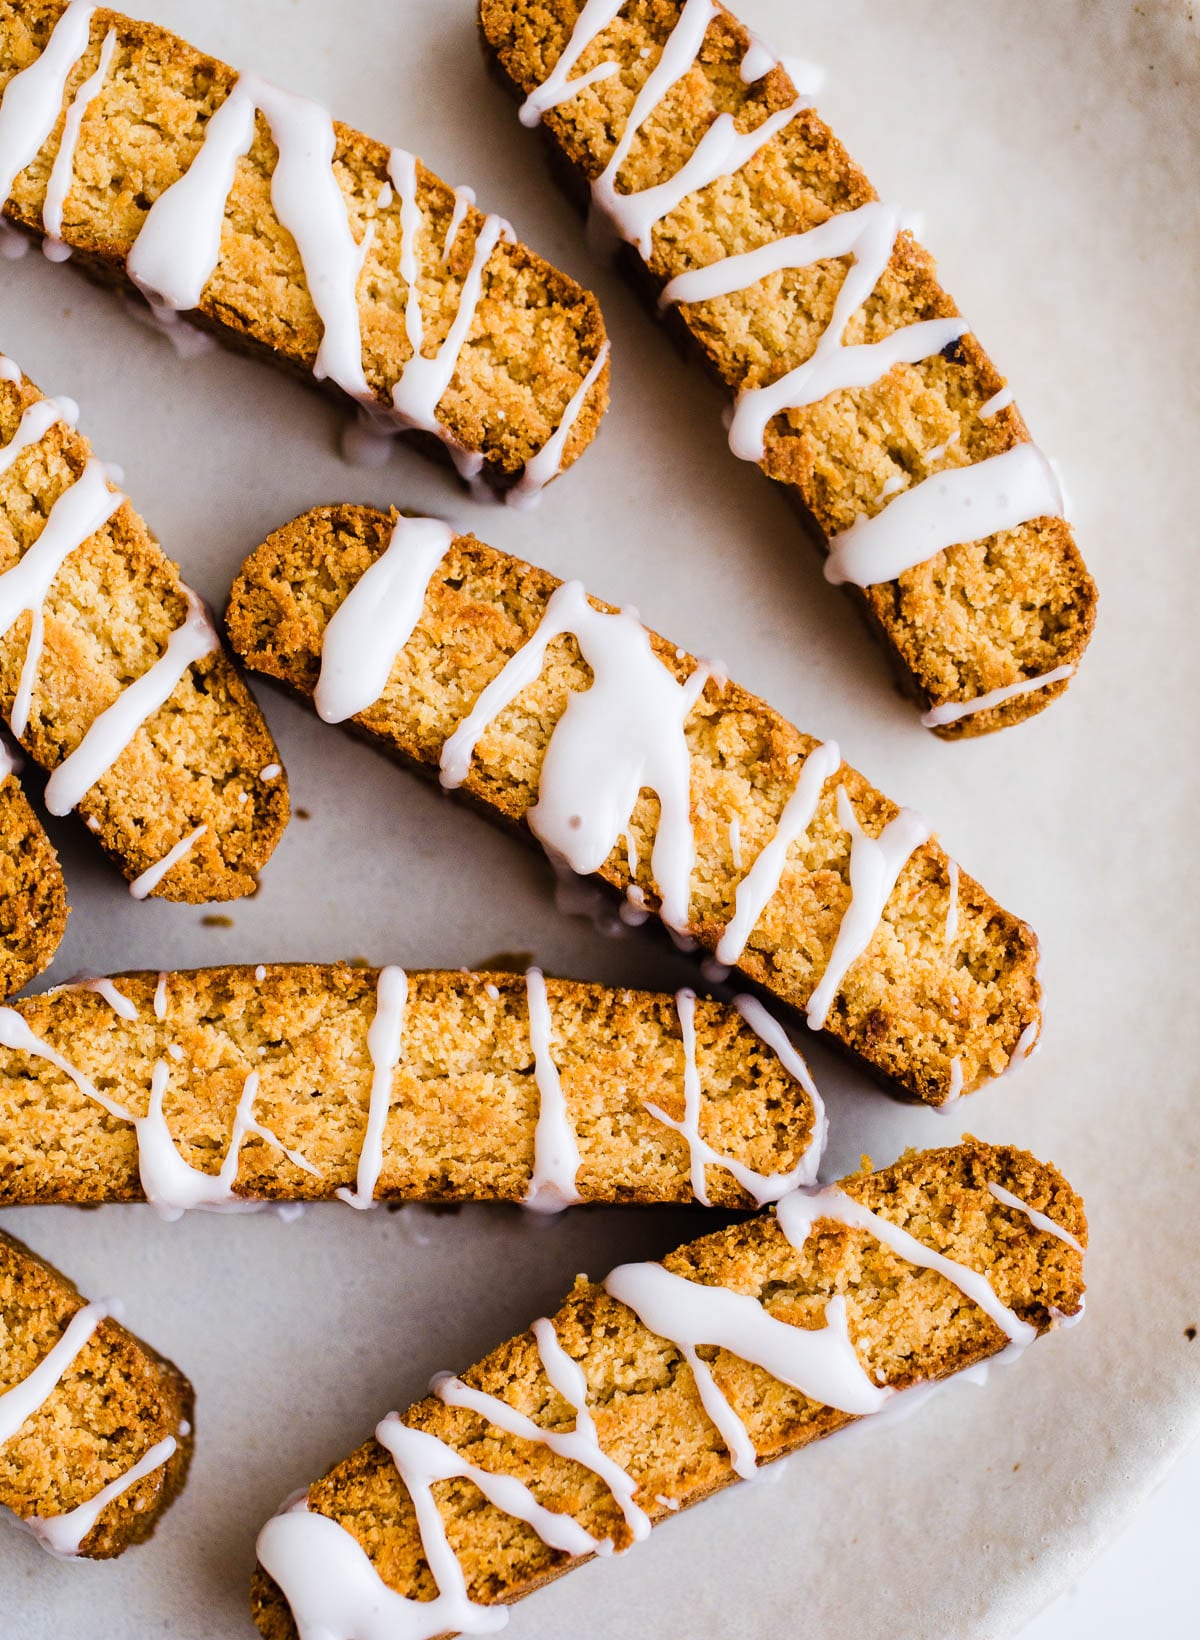 Golden baked biscotti with lemon glaze on top.